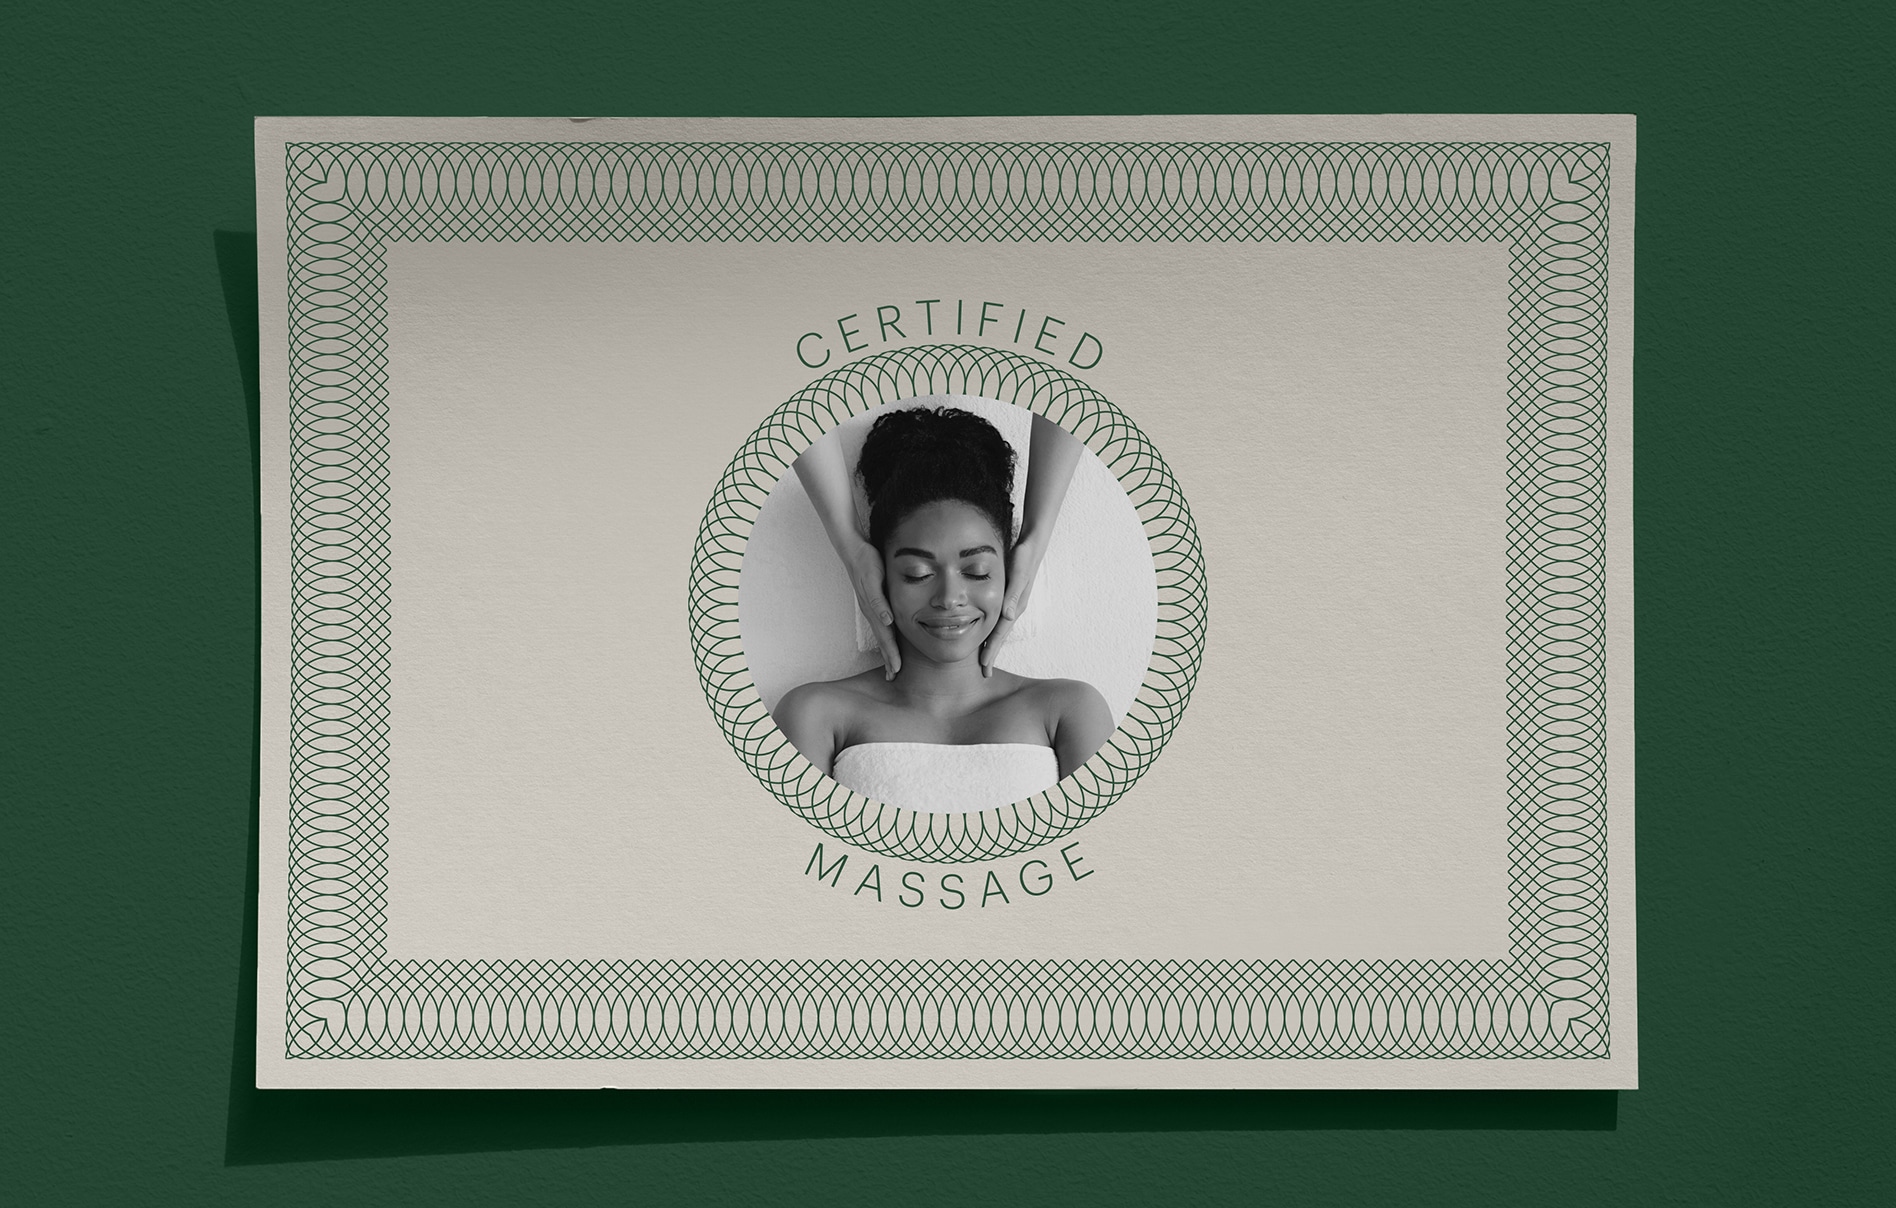 certificate featuring an image of a person receiving a massage